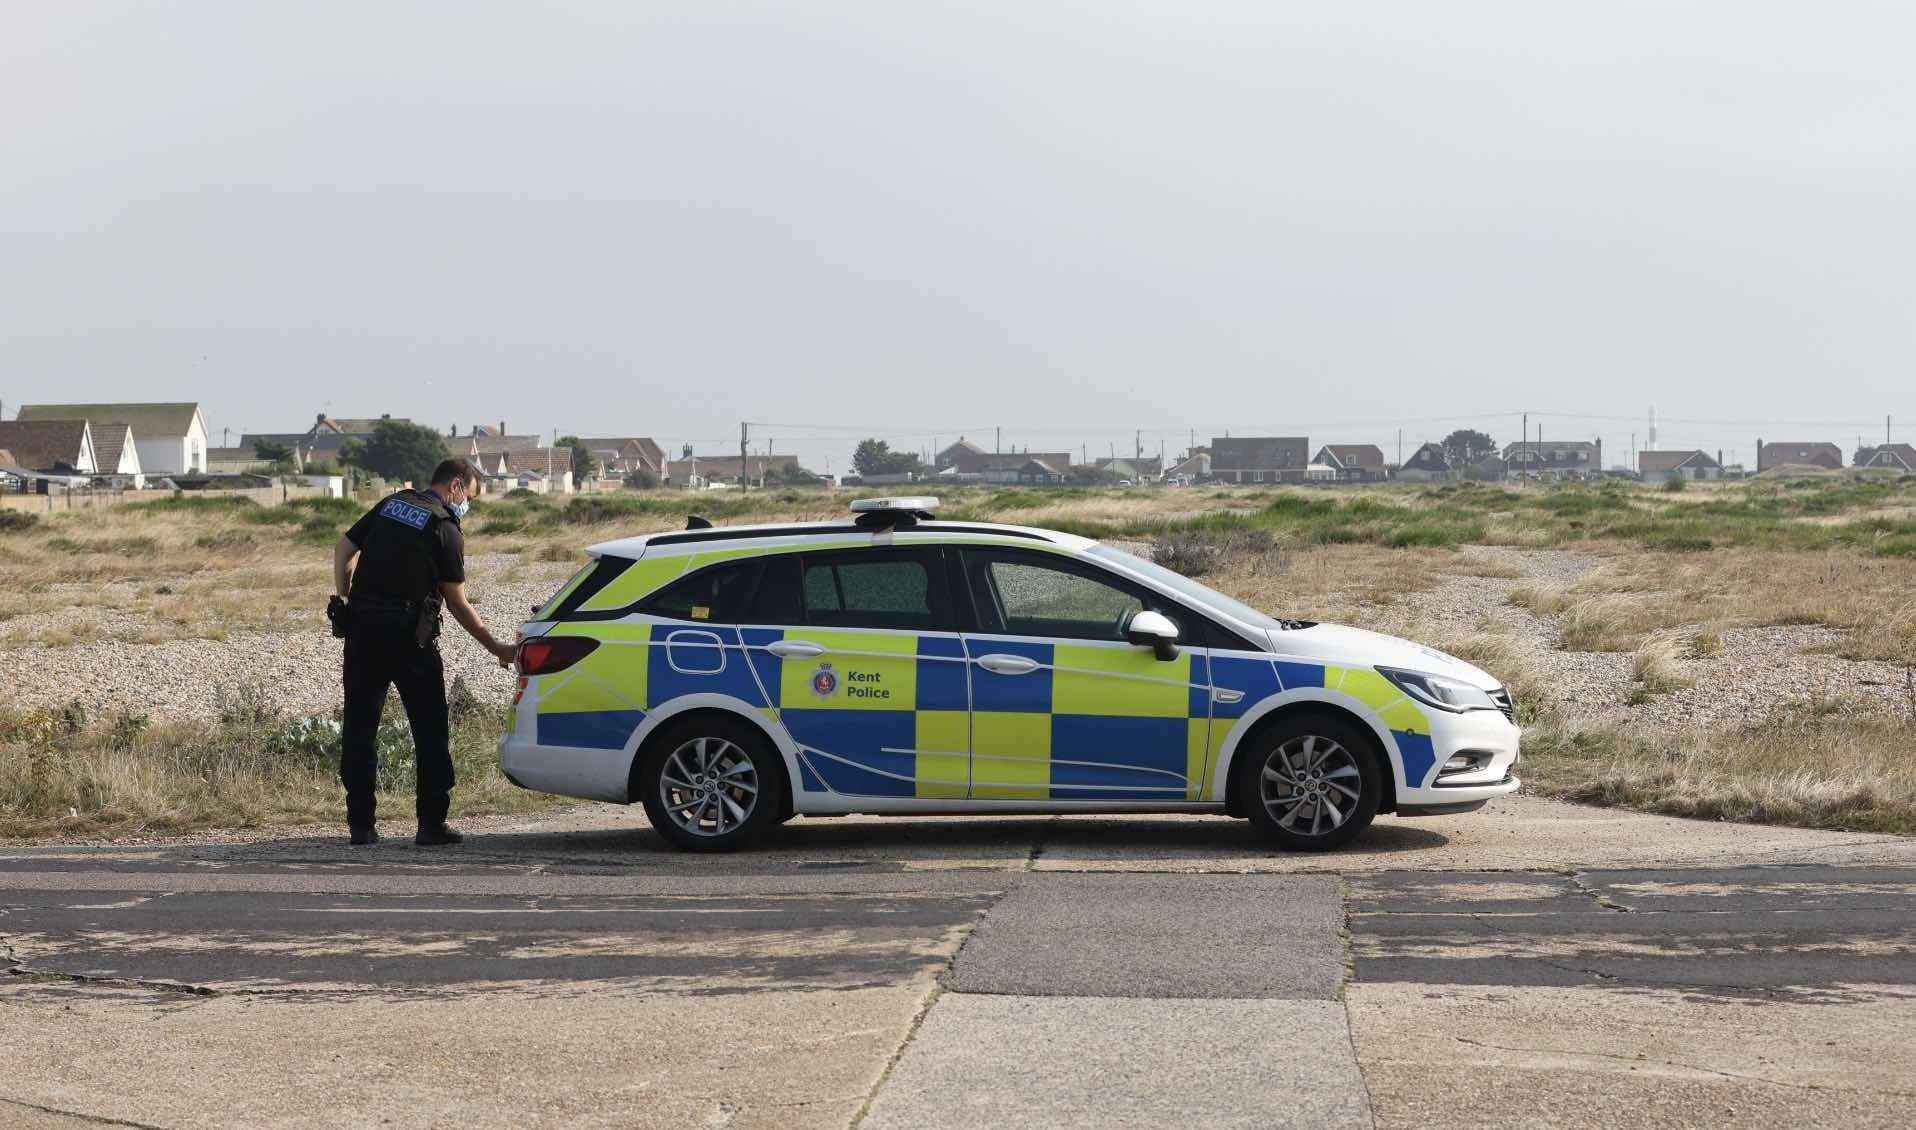 Police in Pleasance Road, Lydd on Sea. Photo: UKNiP